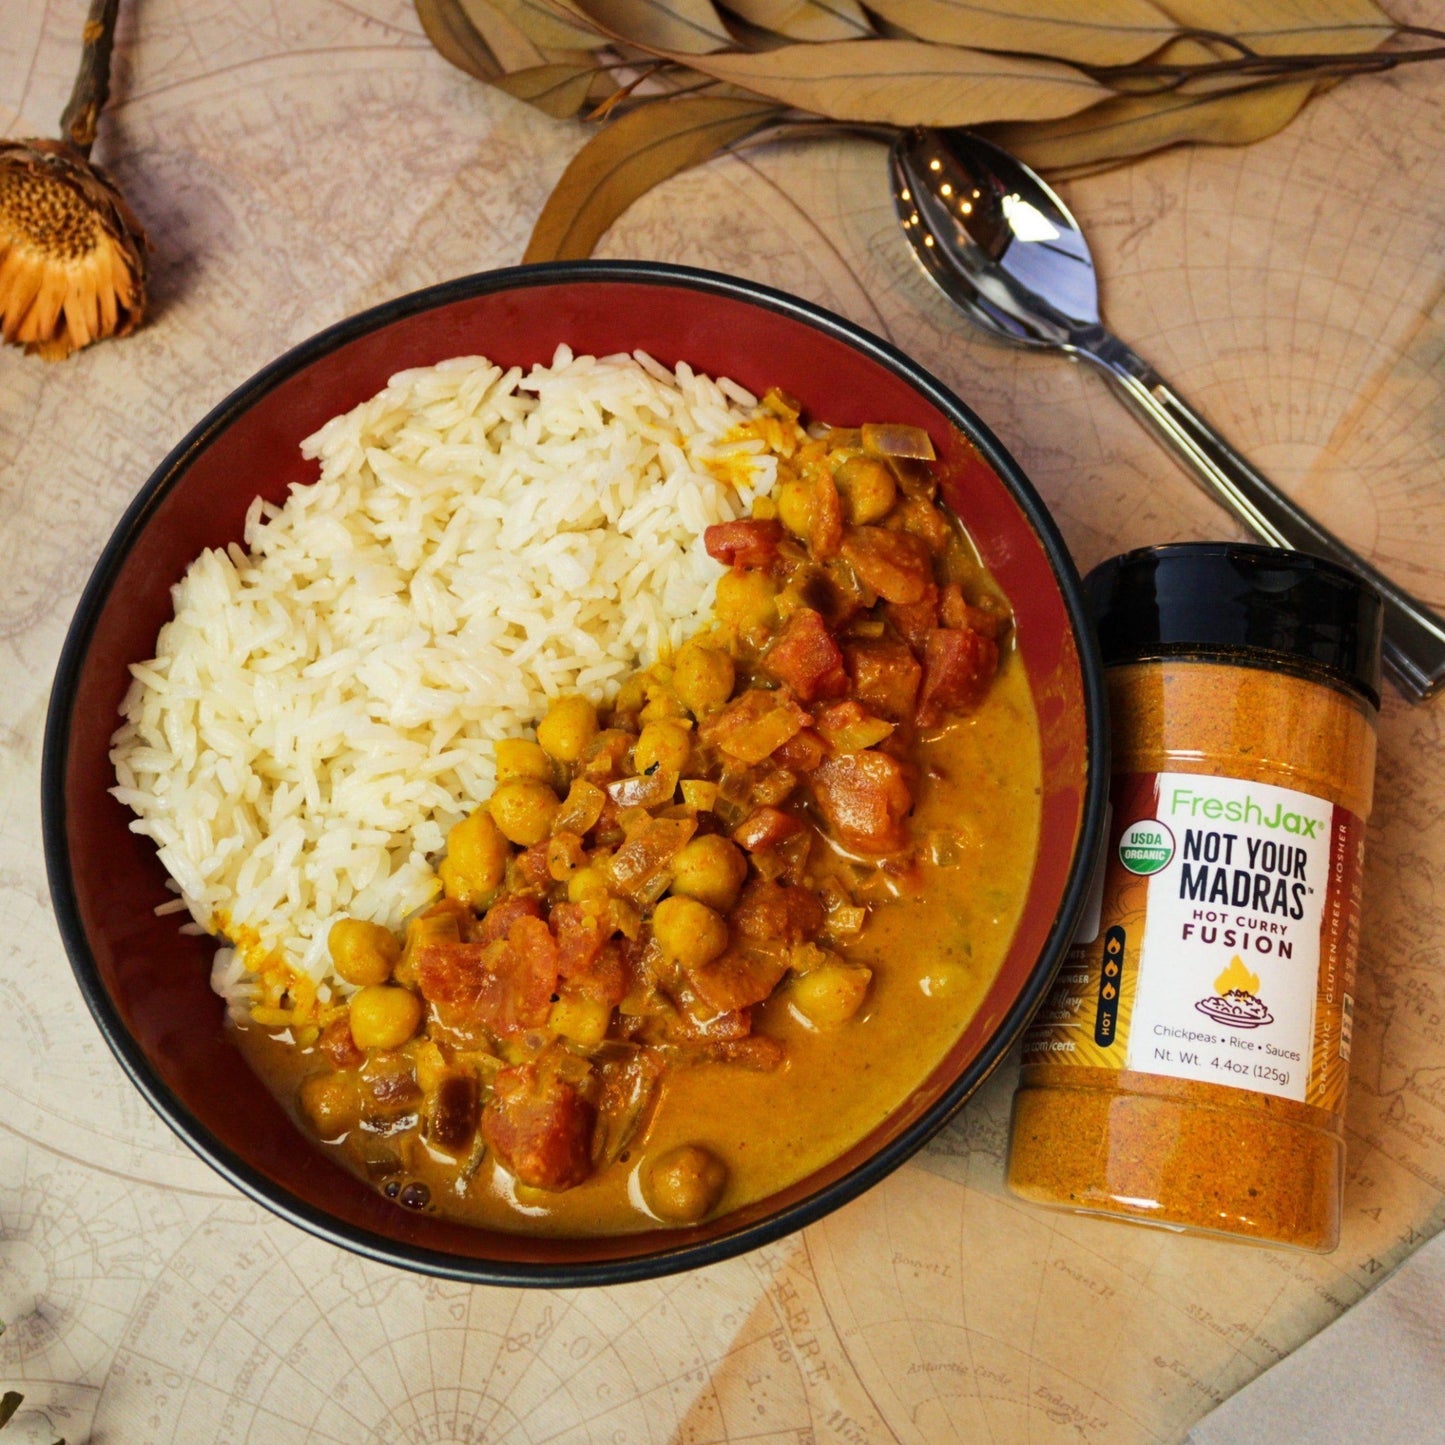 FreshJax Organic Spices Not Your Madra's™: Organic Hot Red Curry Fusion next to a bowl of chickpea curry